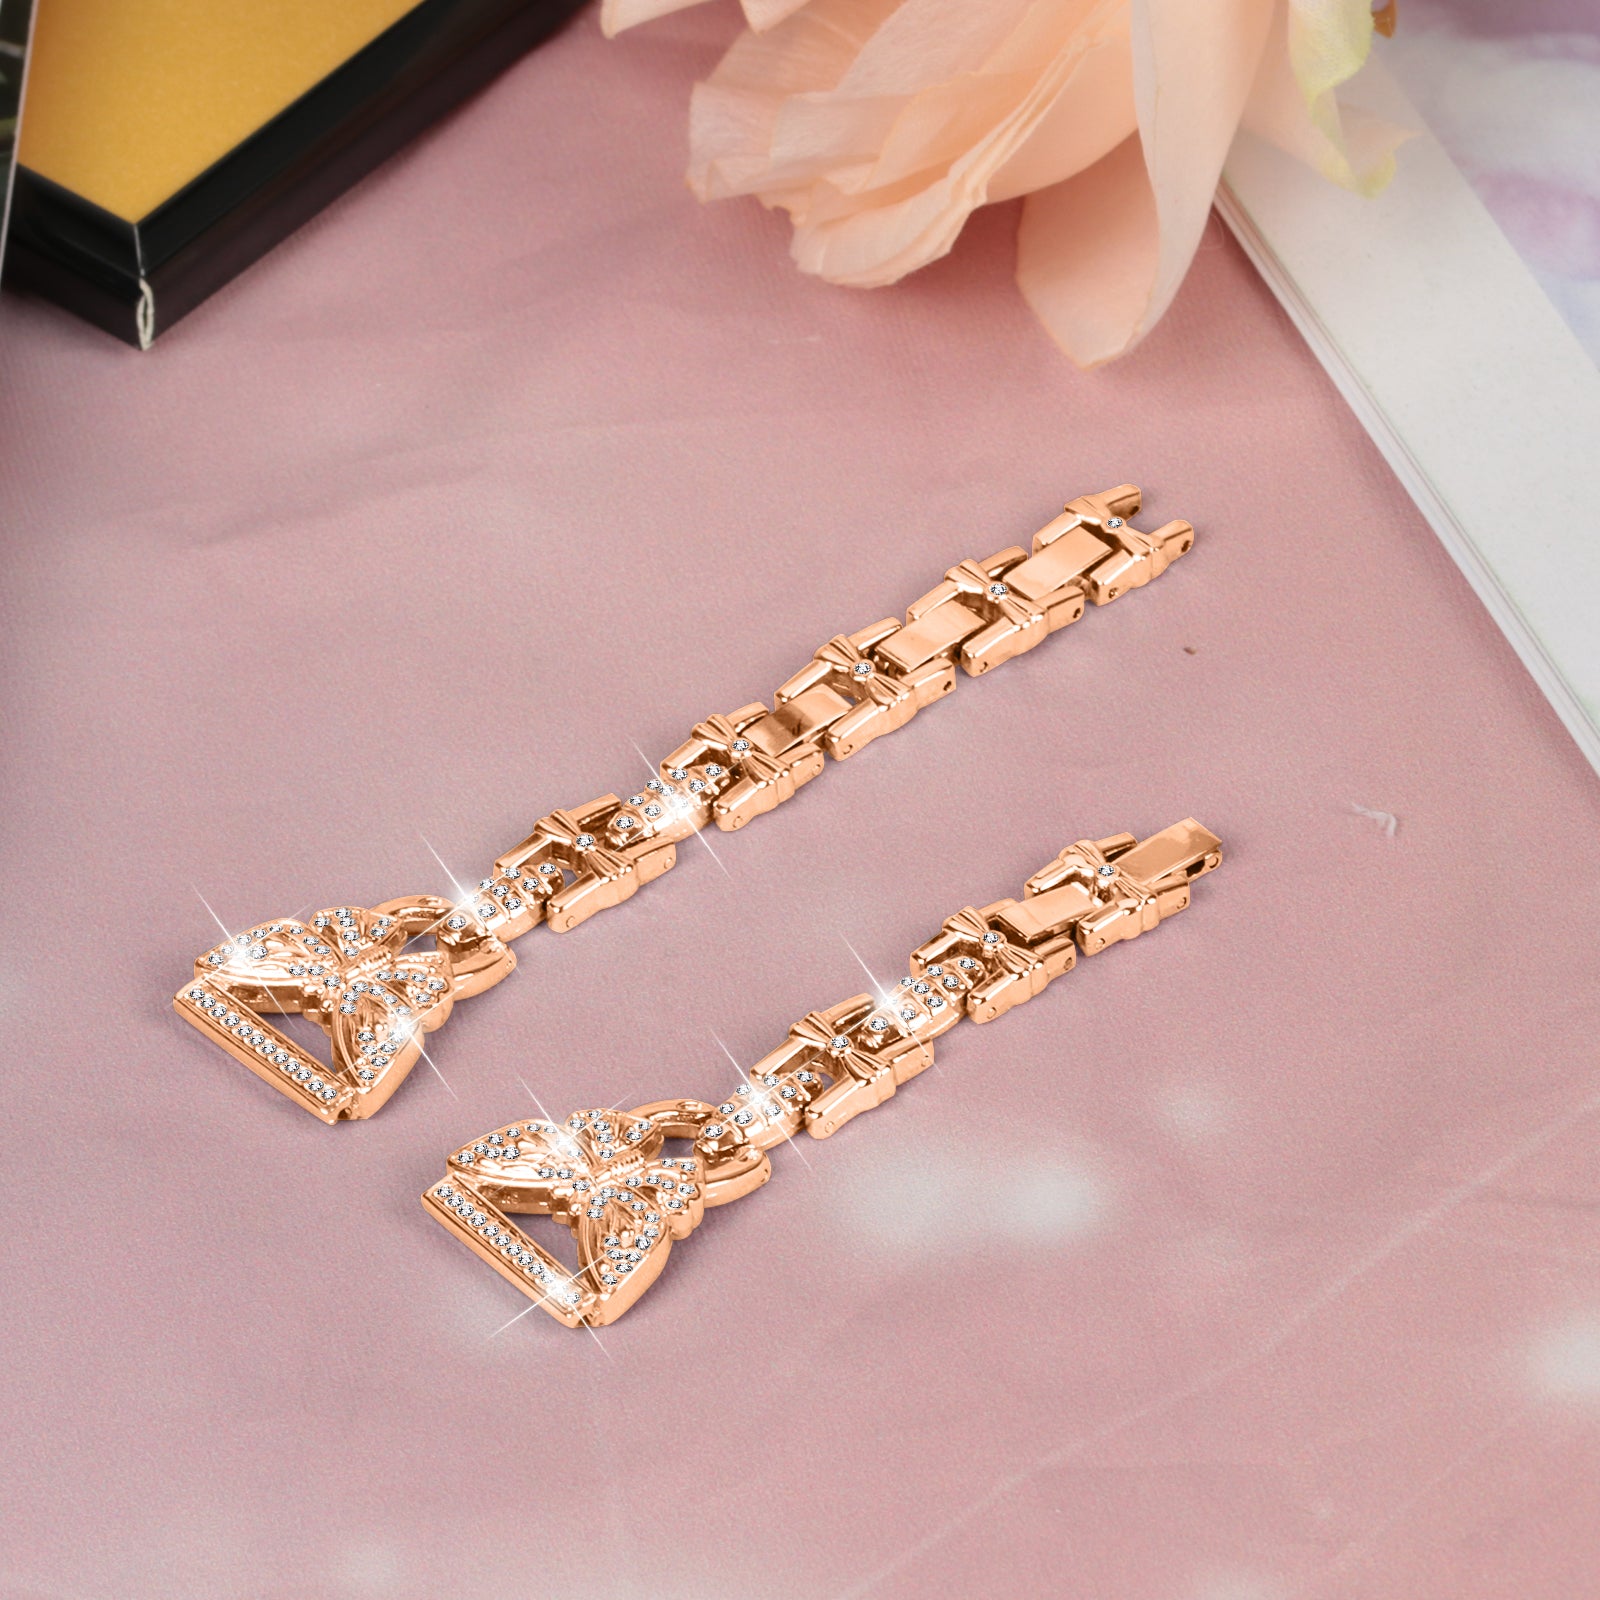 Uniqkart for Samsung Galaxy Watch6 40mm 44mm Stainless Steel Watch Strap Butterfly Rhinestone Decor 20mm Metal Band - Rose Gold